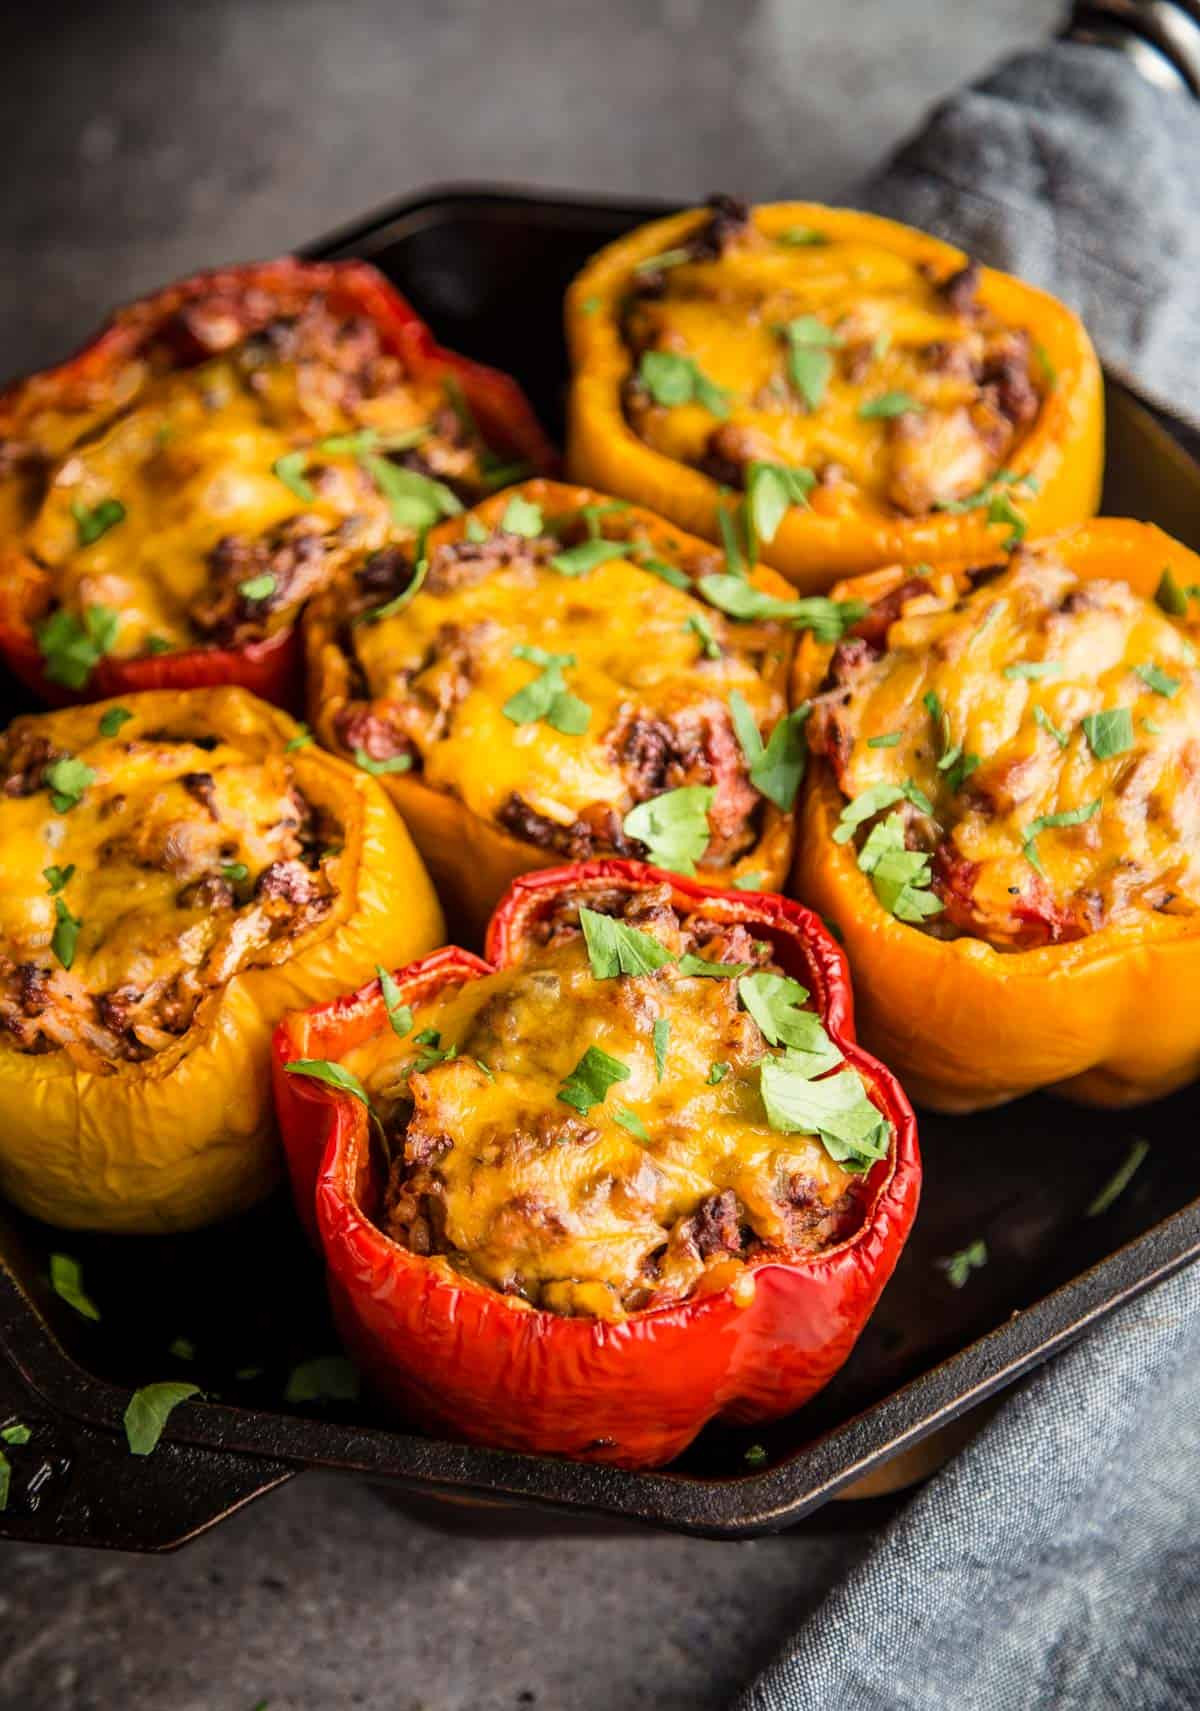 Top 15 Stuffed Peppers with Ground Beef